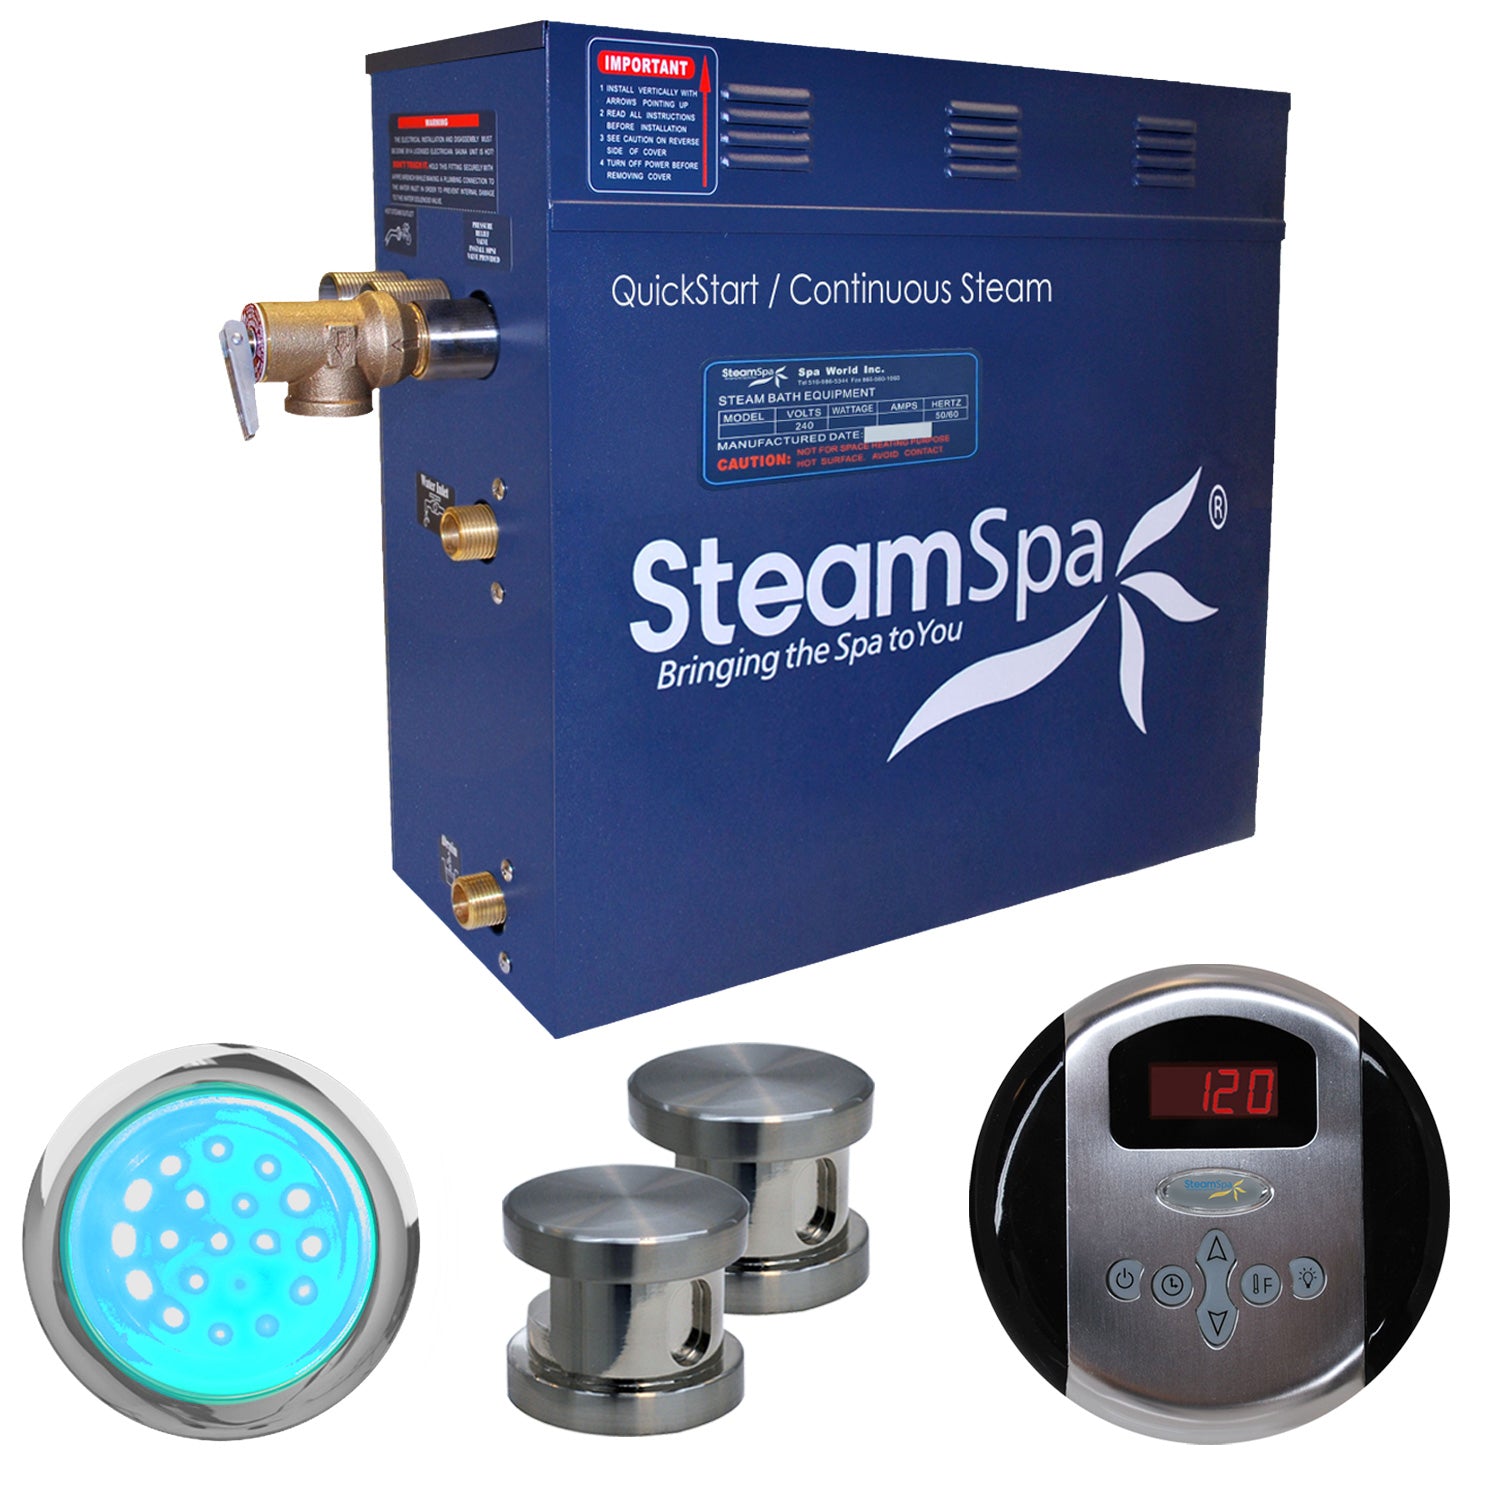 SteamSpa Indulgence 12 KW QuickStart Acu-Steam Bath Generator Package - 17 in. L x 9.25 in. W x 15 in. H - Stainless Steel - Brushed nickel finish - Package includes a 12kW QuickStart Acu-Steam Bath Generator, Control Panel, Two Brushed nickel Steam heads, Chroma therapy three color mode LED light, Pressure Relief Valve - IN1200 - Vital Hydrotherapy